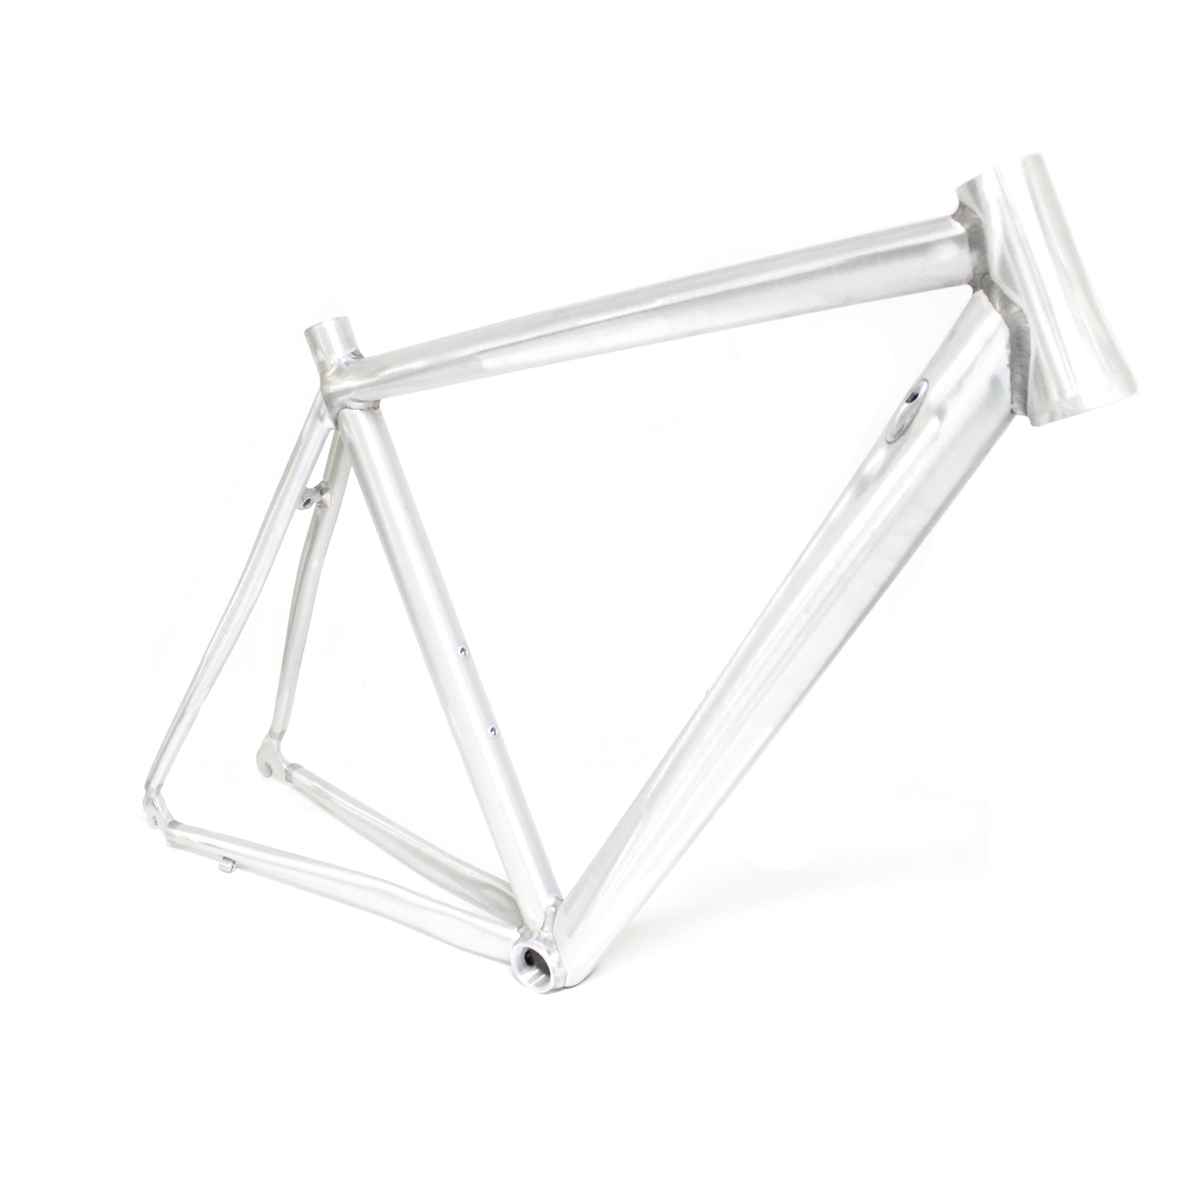 Road alloy tapered Caliper Frame size 55